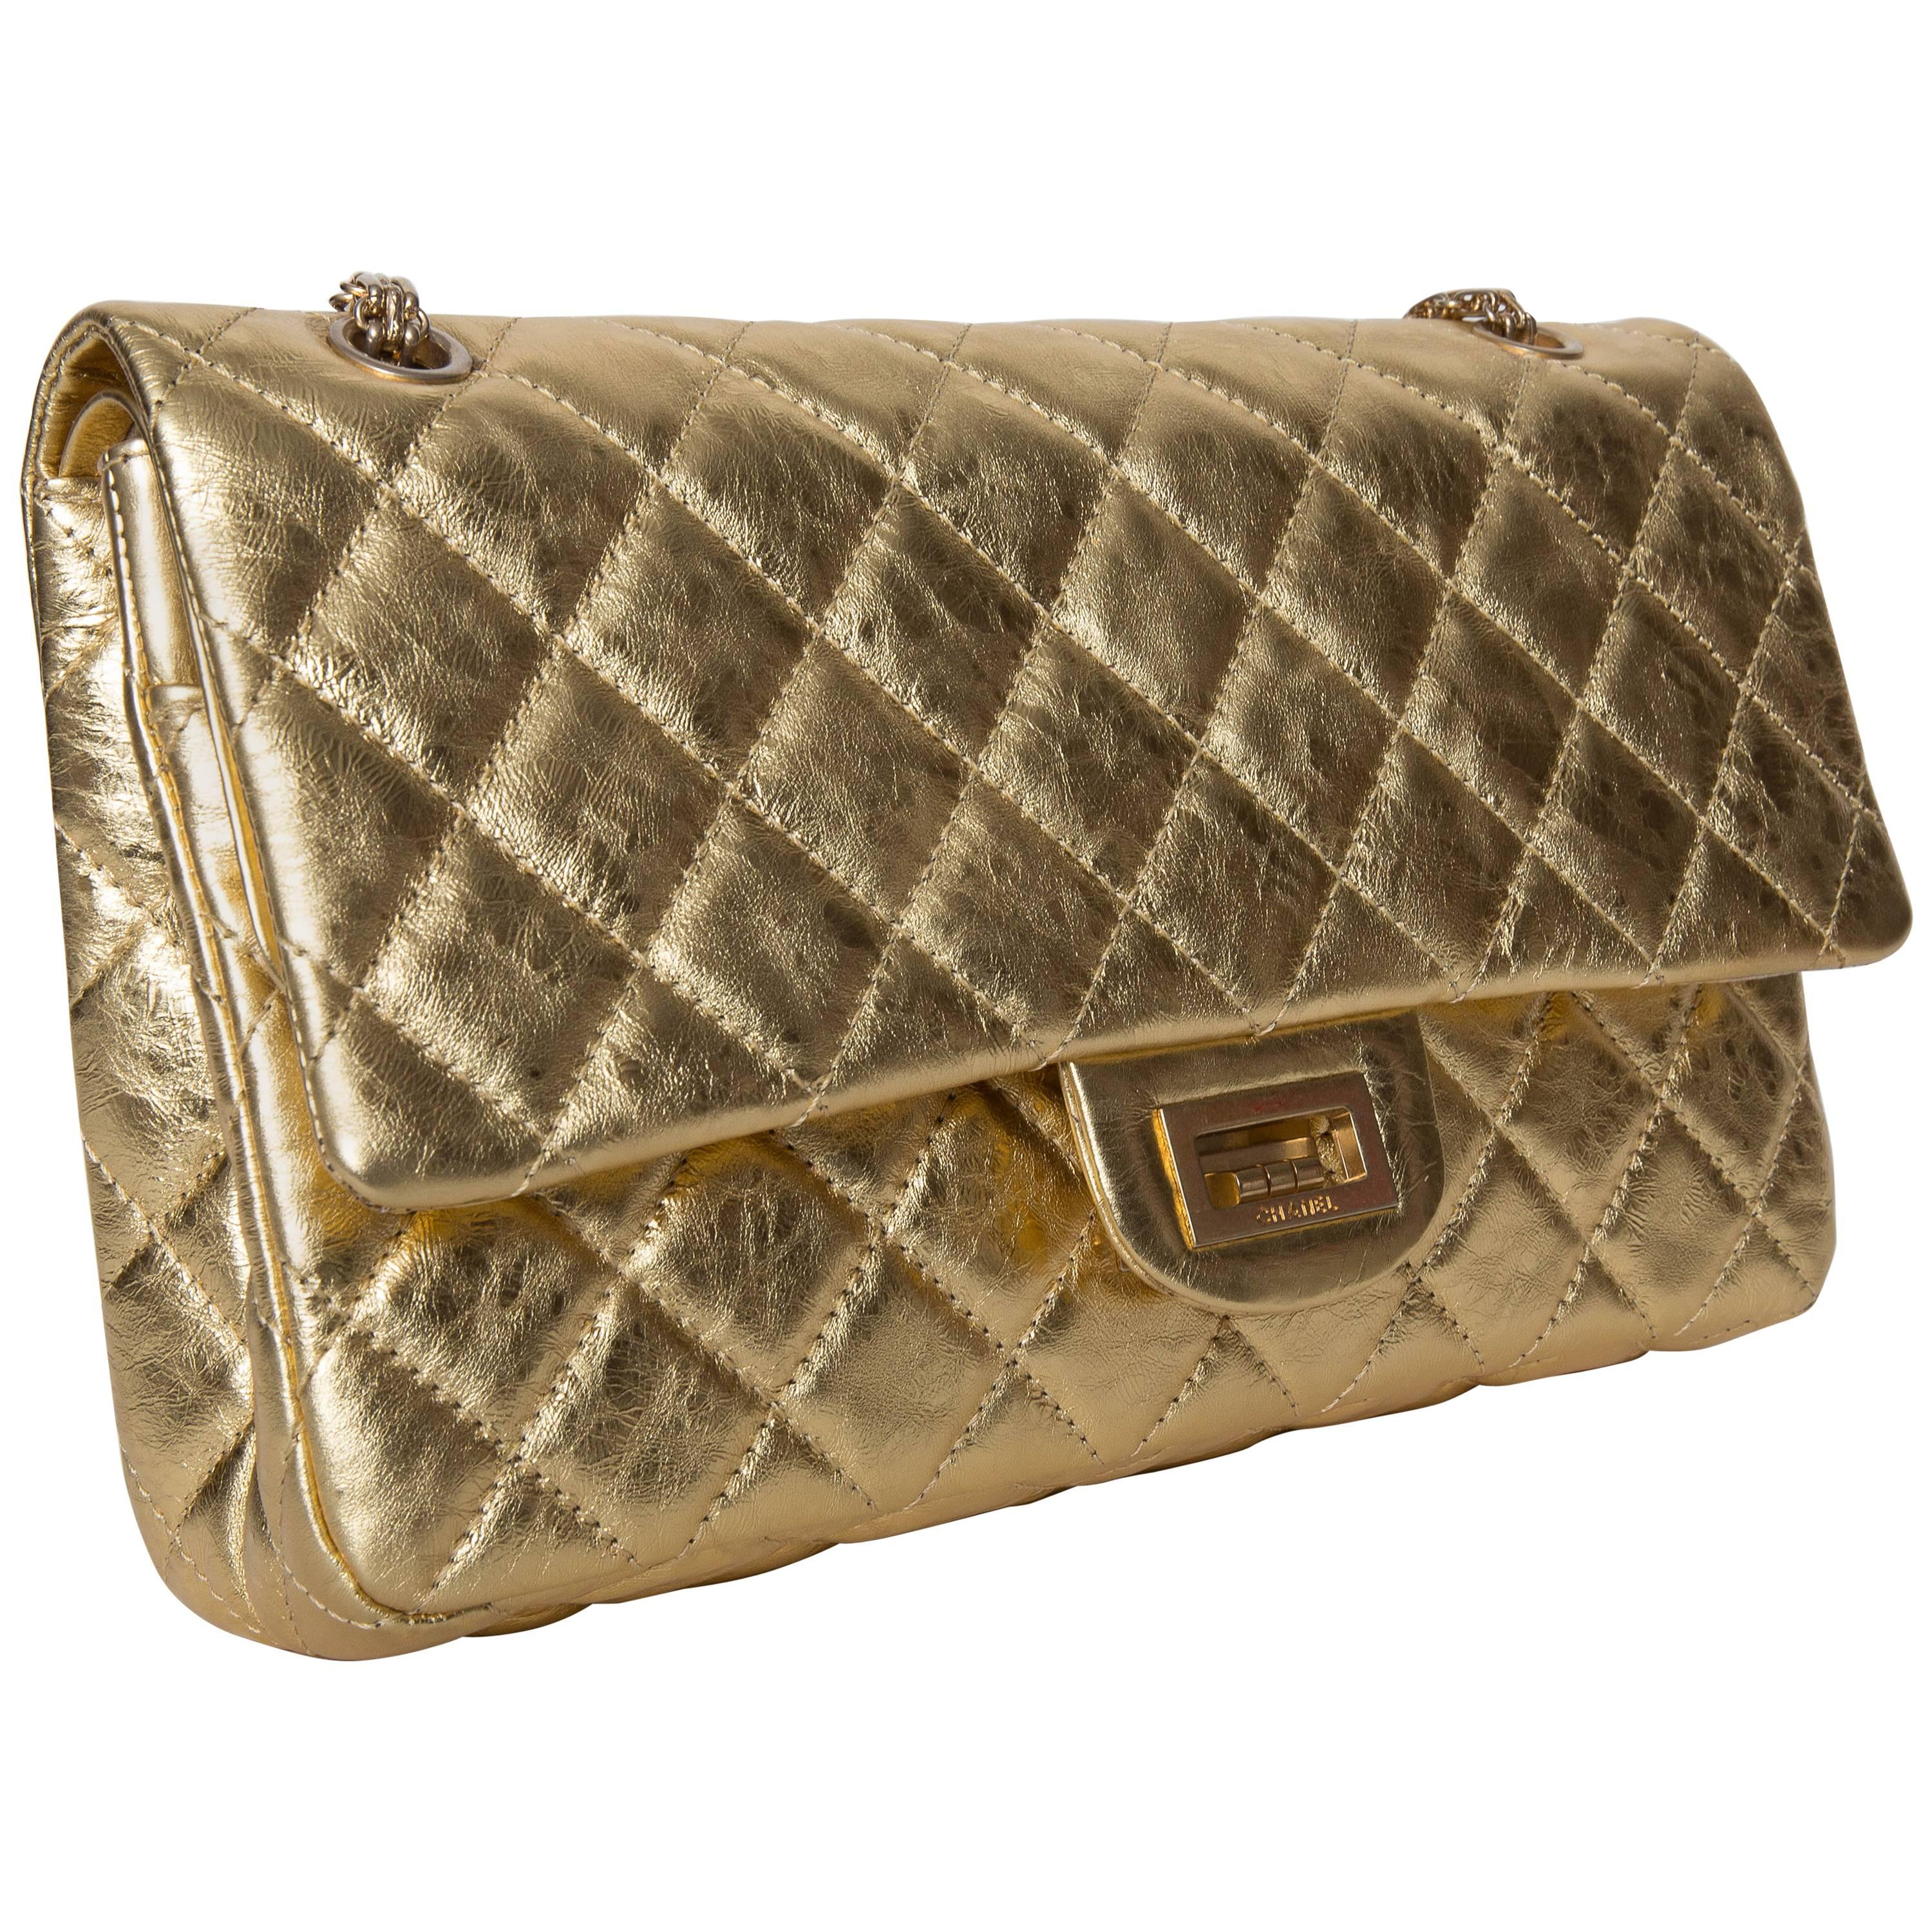 Chanel Gold Jumbo Double Flap Shoulder Bag With Chanel Box and Dustbag, 2008  